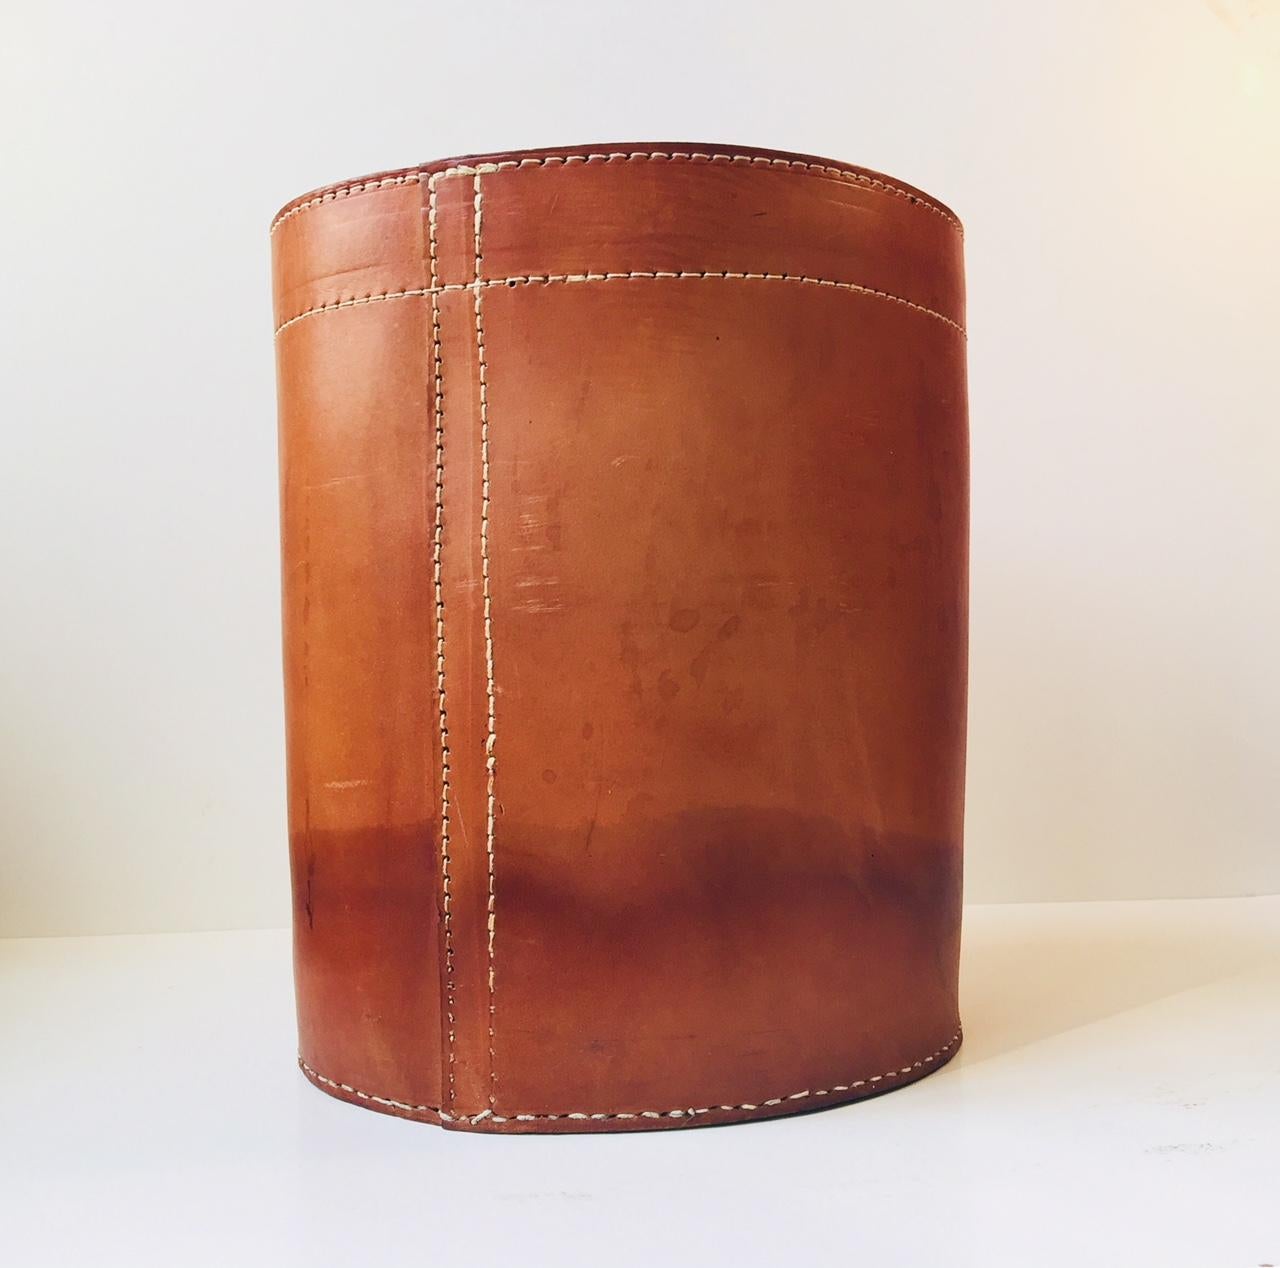 Naturally aged and patinated office waste basket in very thick leather (9mm). It was manufactured in Denmark during the 1960s in a style reminiscent of Jacques Adnet and Carl Auböck. It was probably commissioned by Illums Bolighus in Copenhagen,